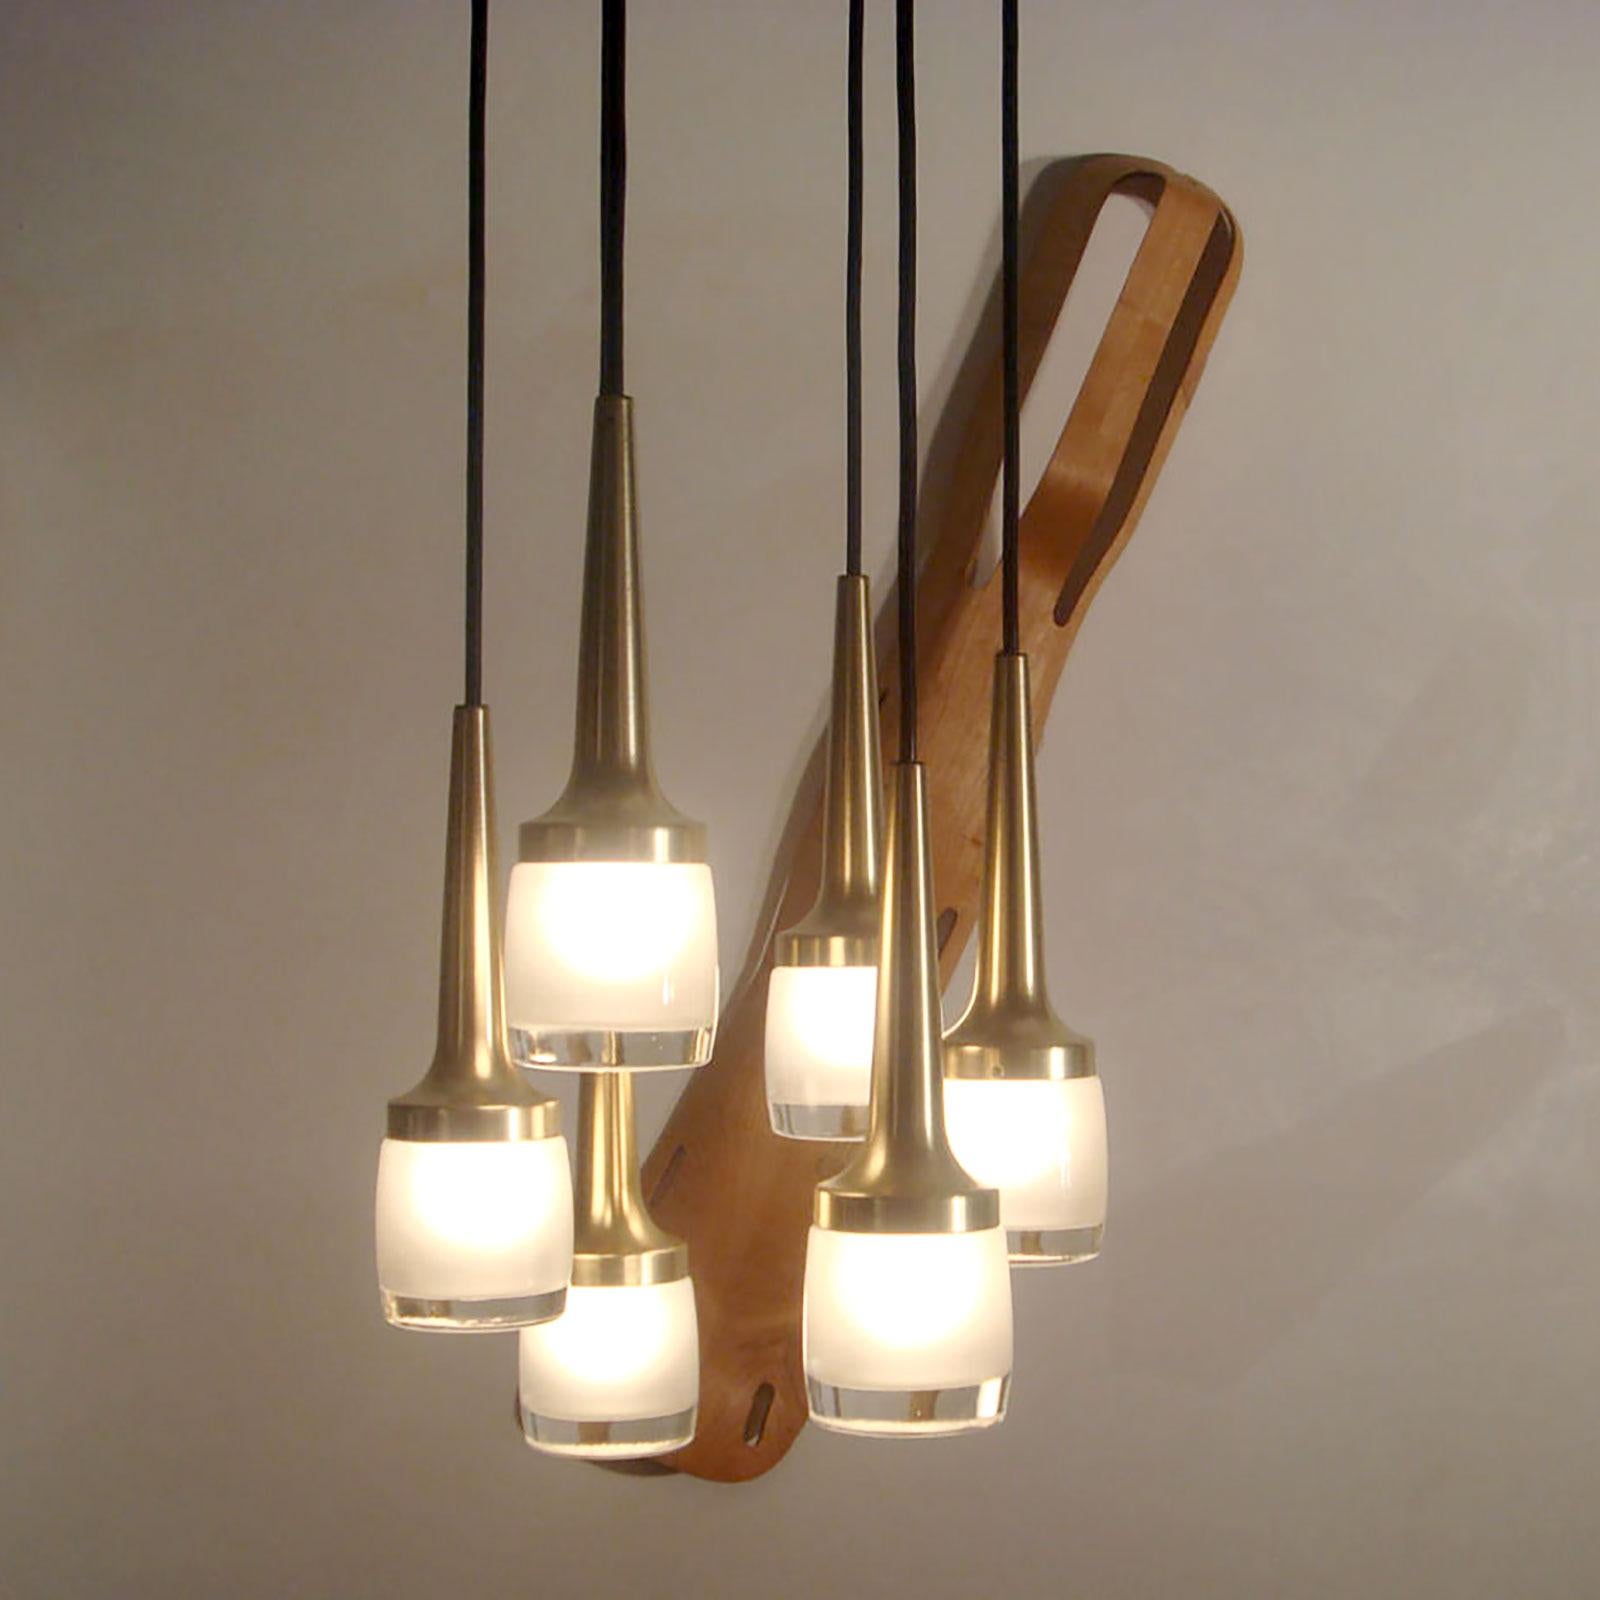 Late 20th Century Six-Light Hanging Fixture by Staff of Germany, 1970 For Sale